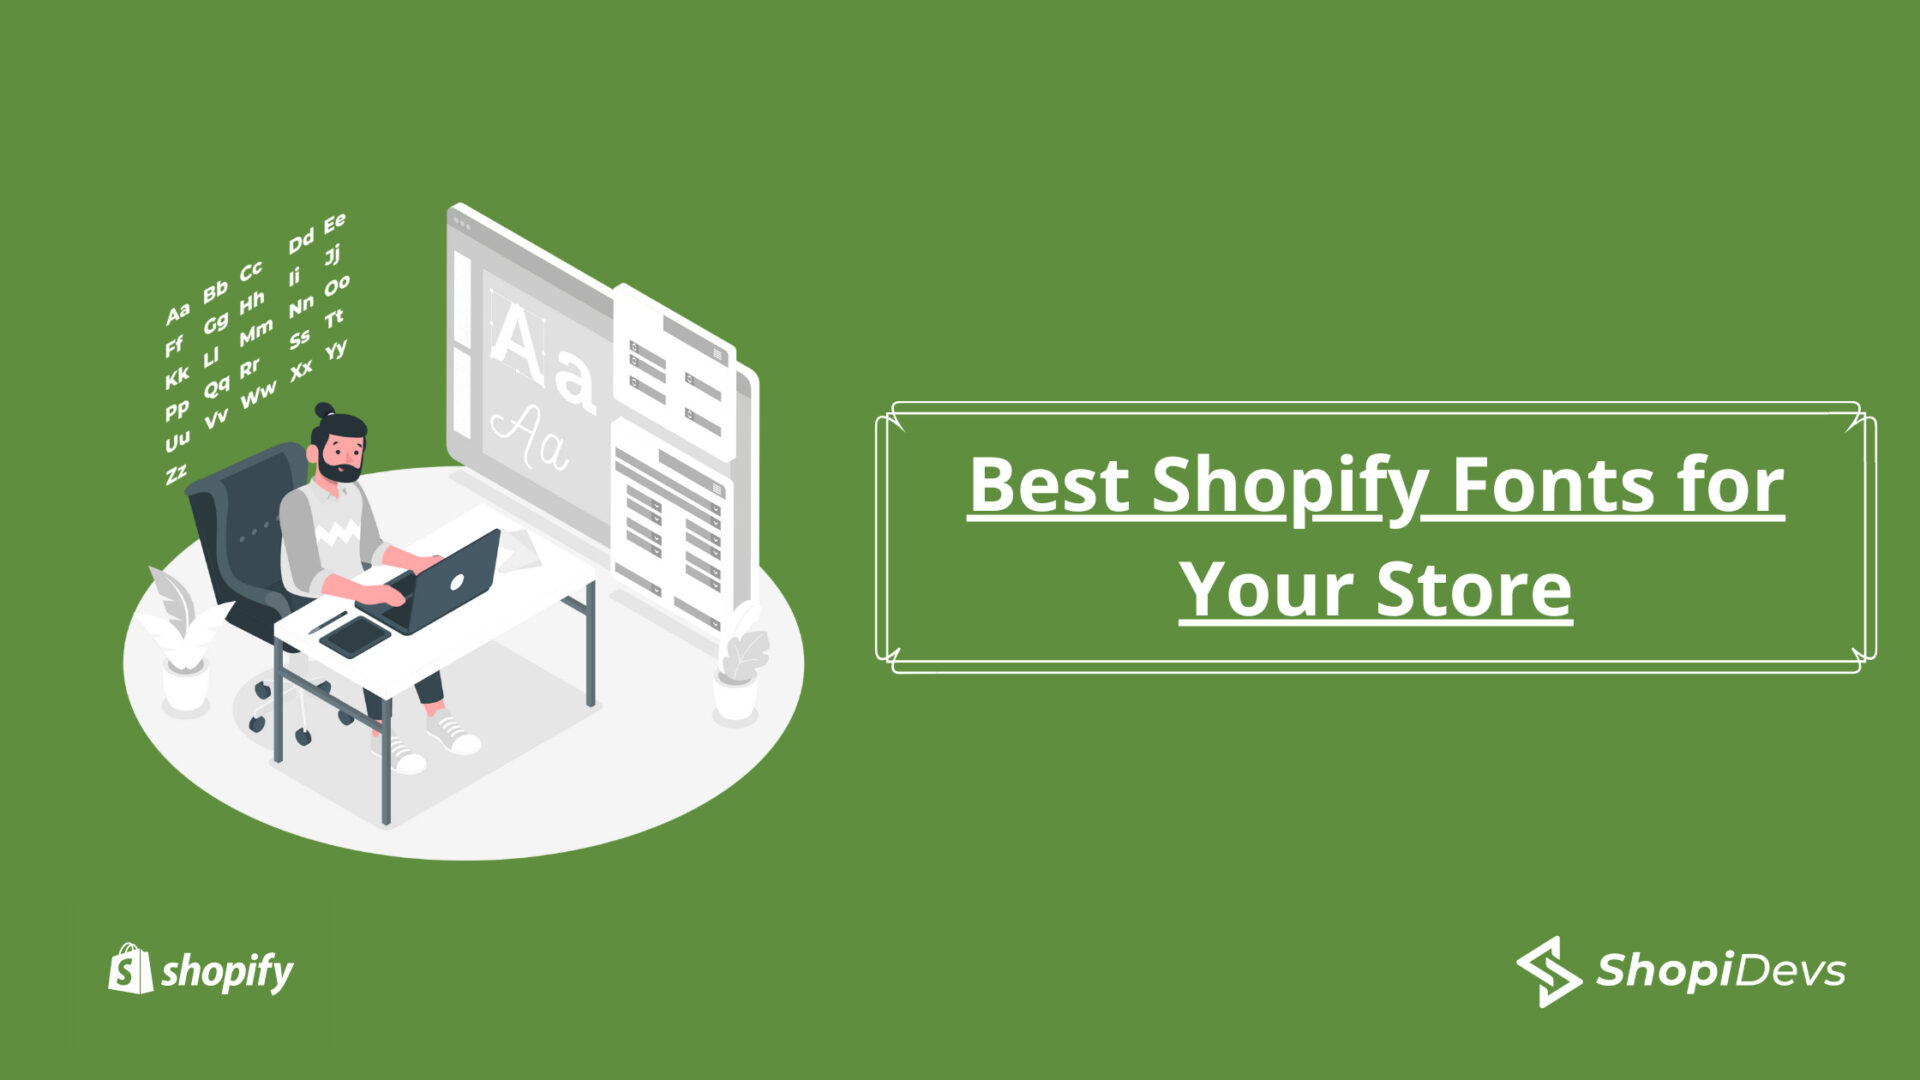 Best Shopify Fonts for Your Store